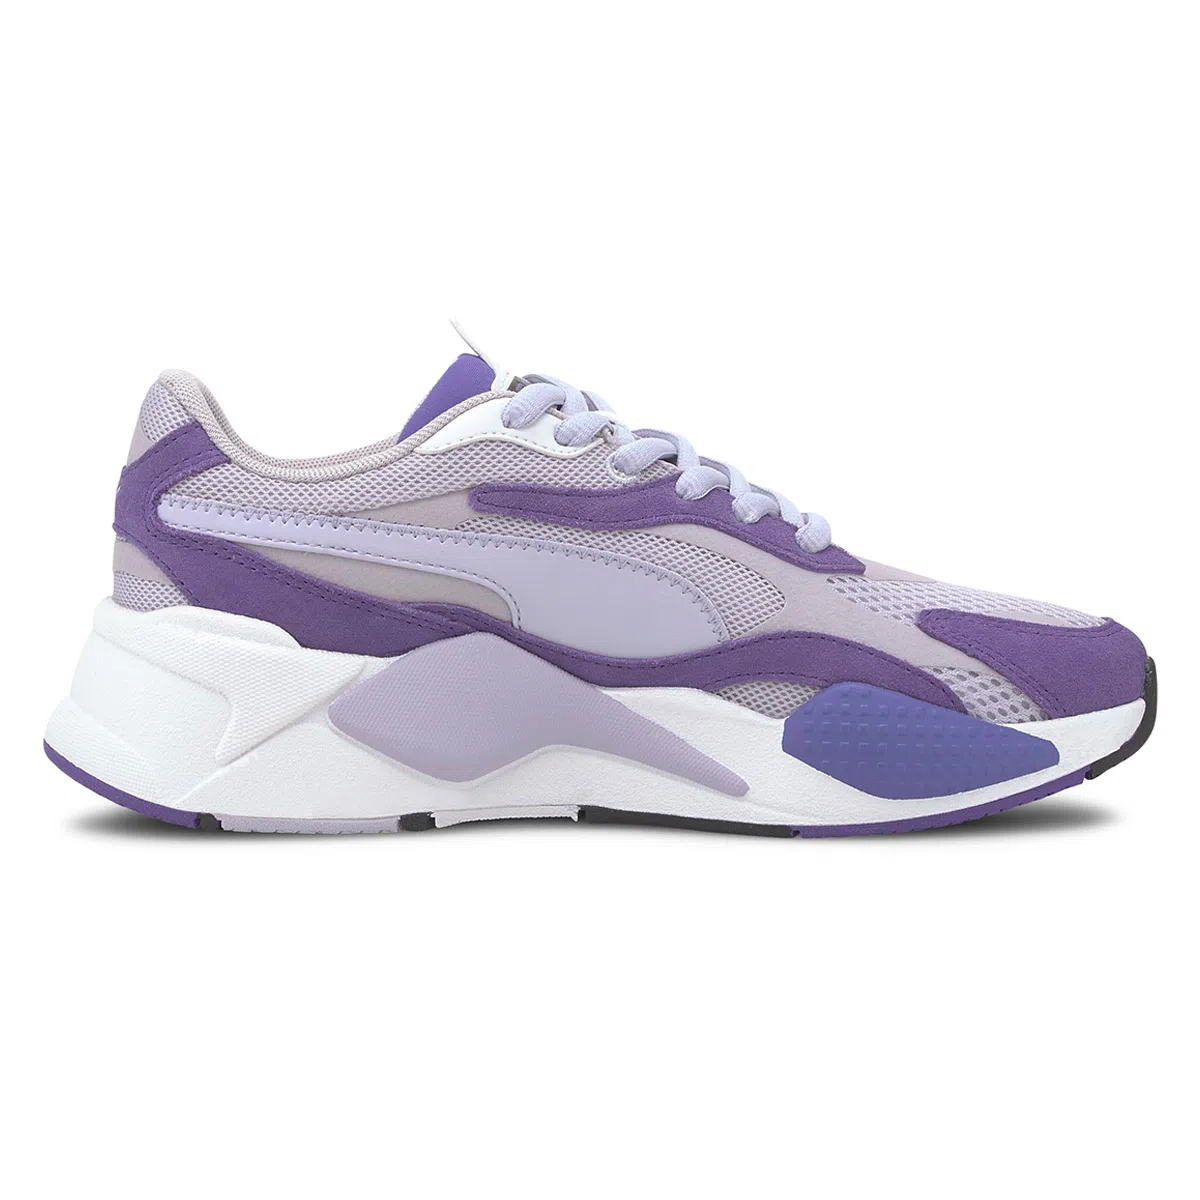 Zapatillas Puma RS-X3 Super,  image number null